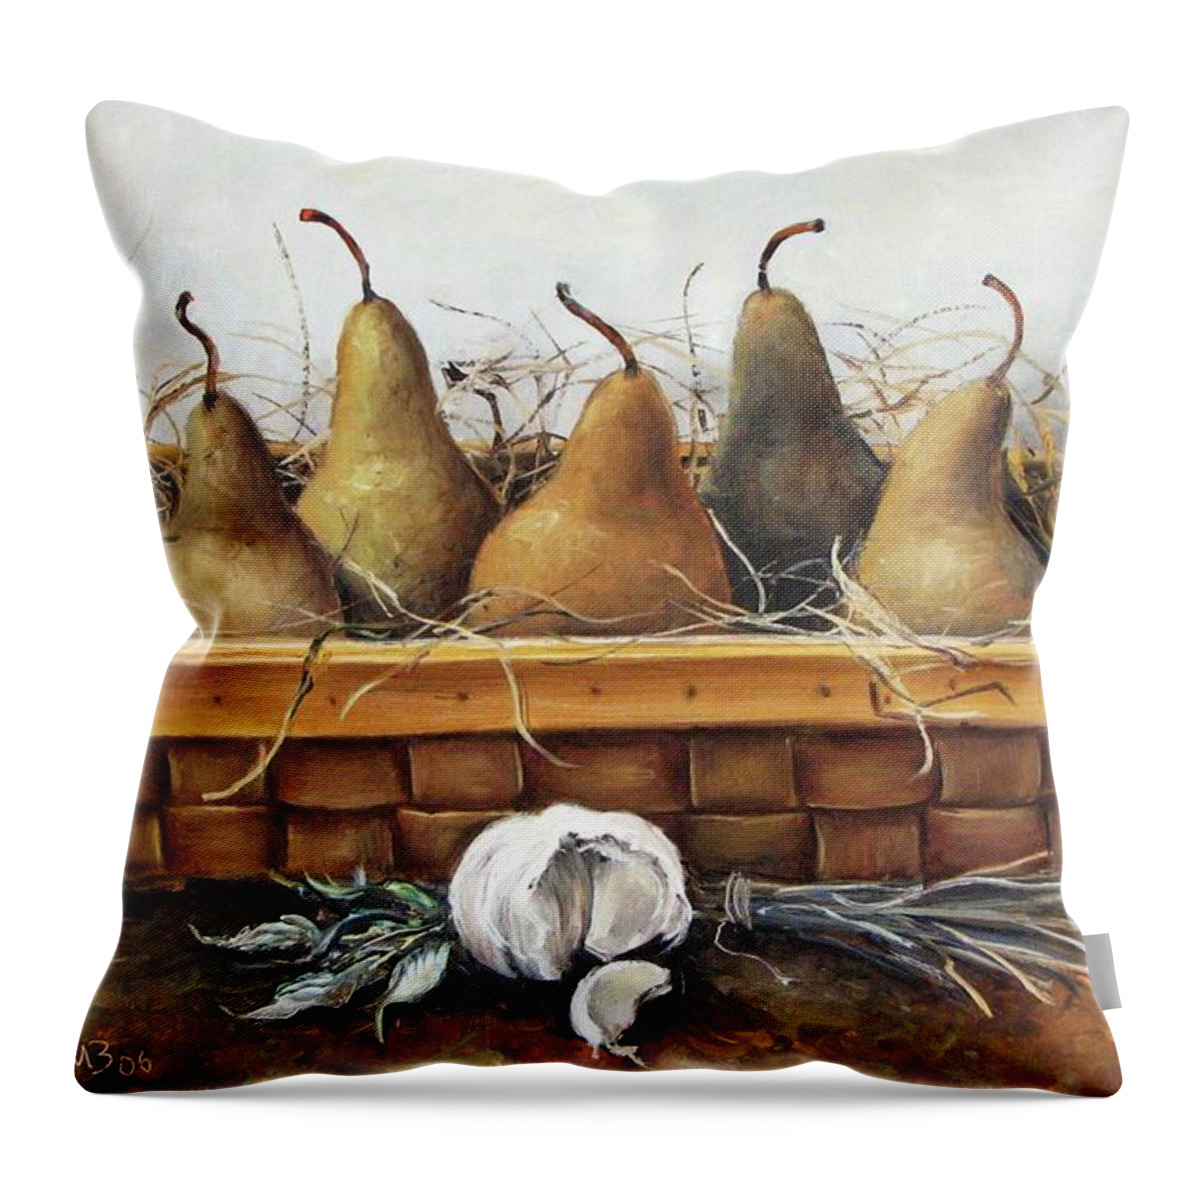  Throw Pillow featuring the painting Pears by Mikhail Zarovny